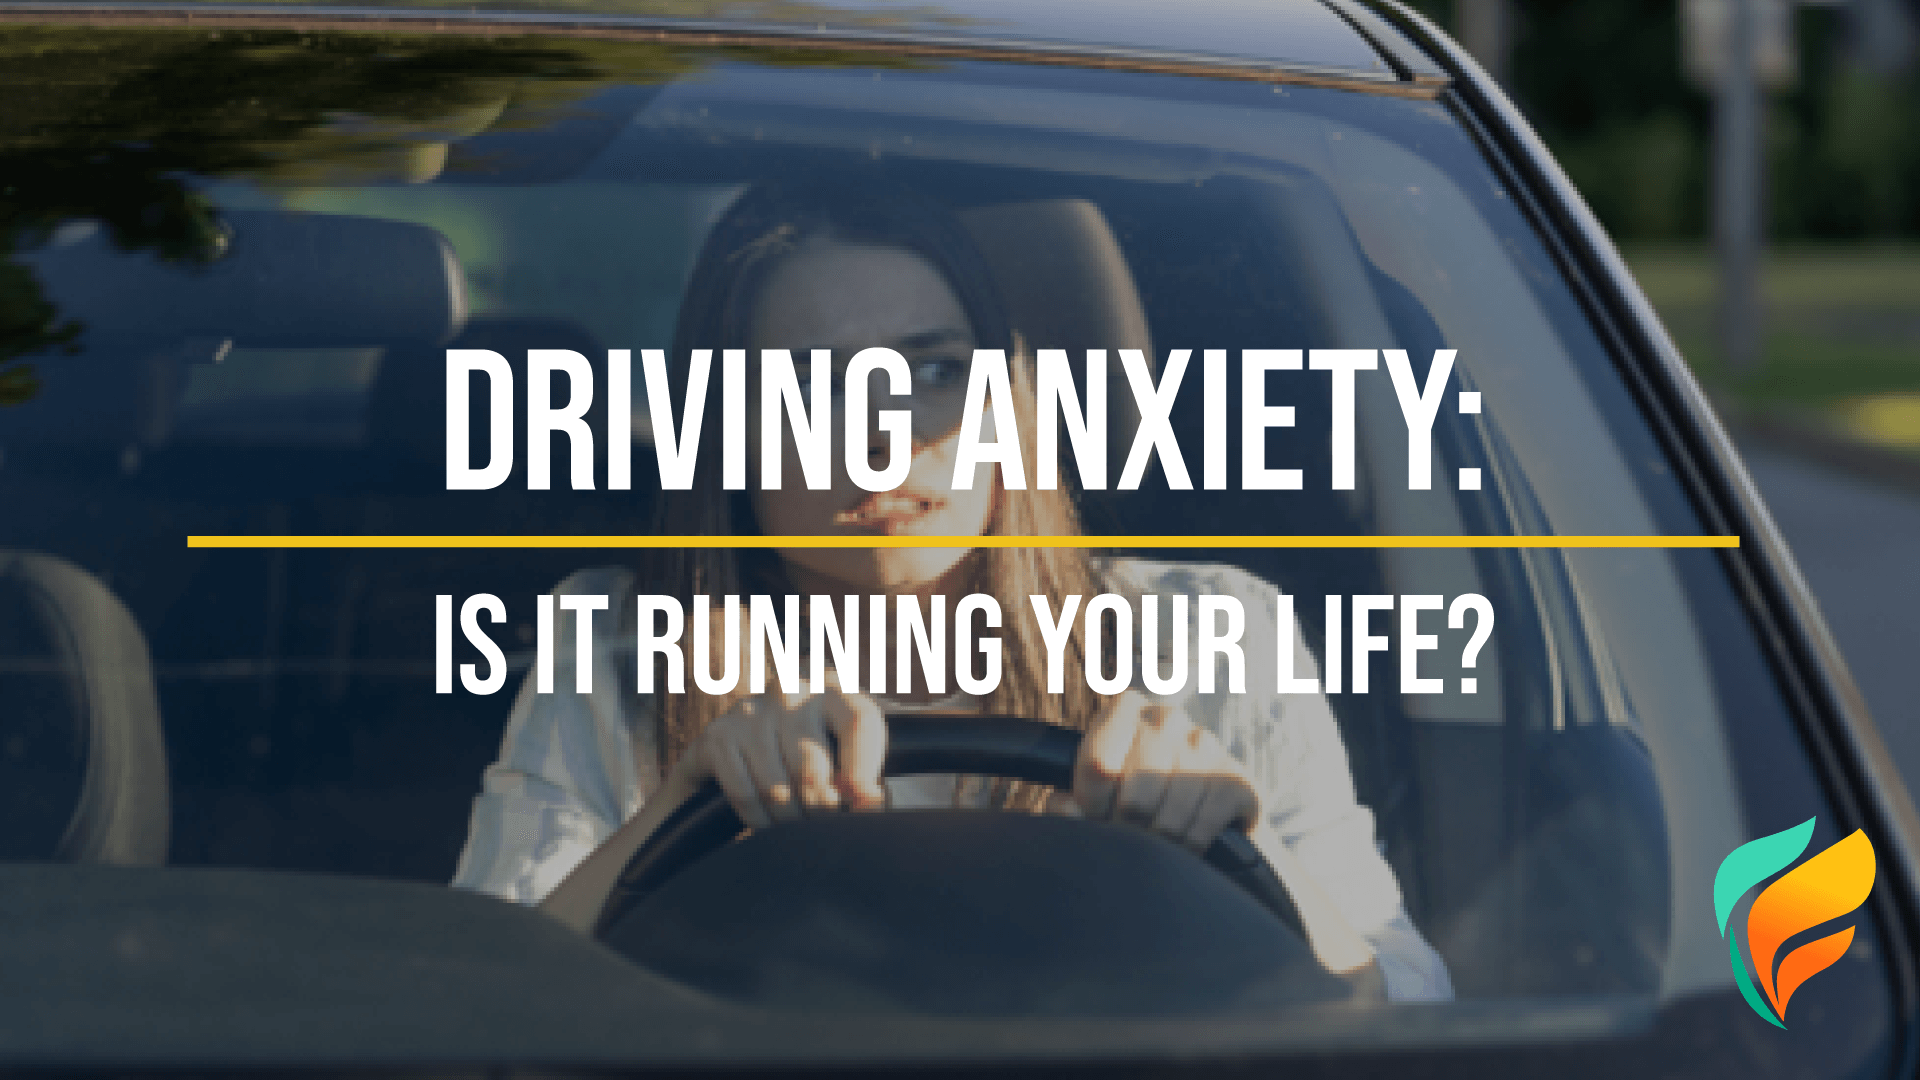 Driving Anxiety: Is Driving Anxiety Ruining Your Life?